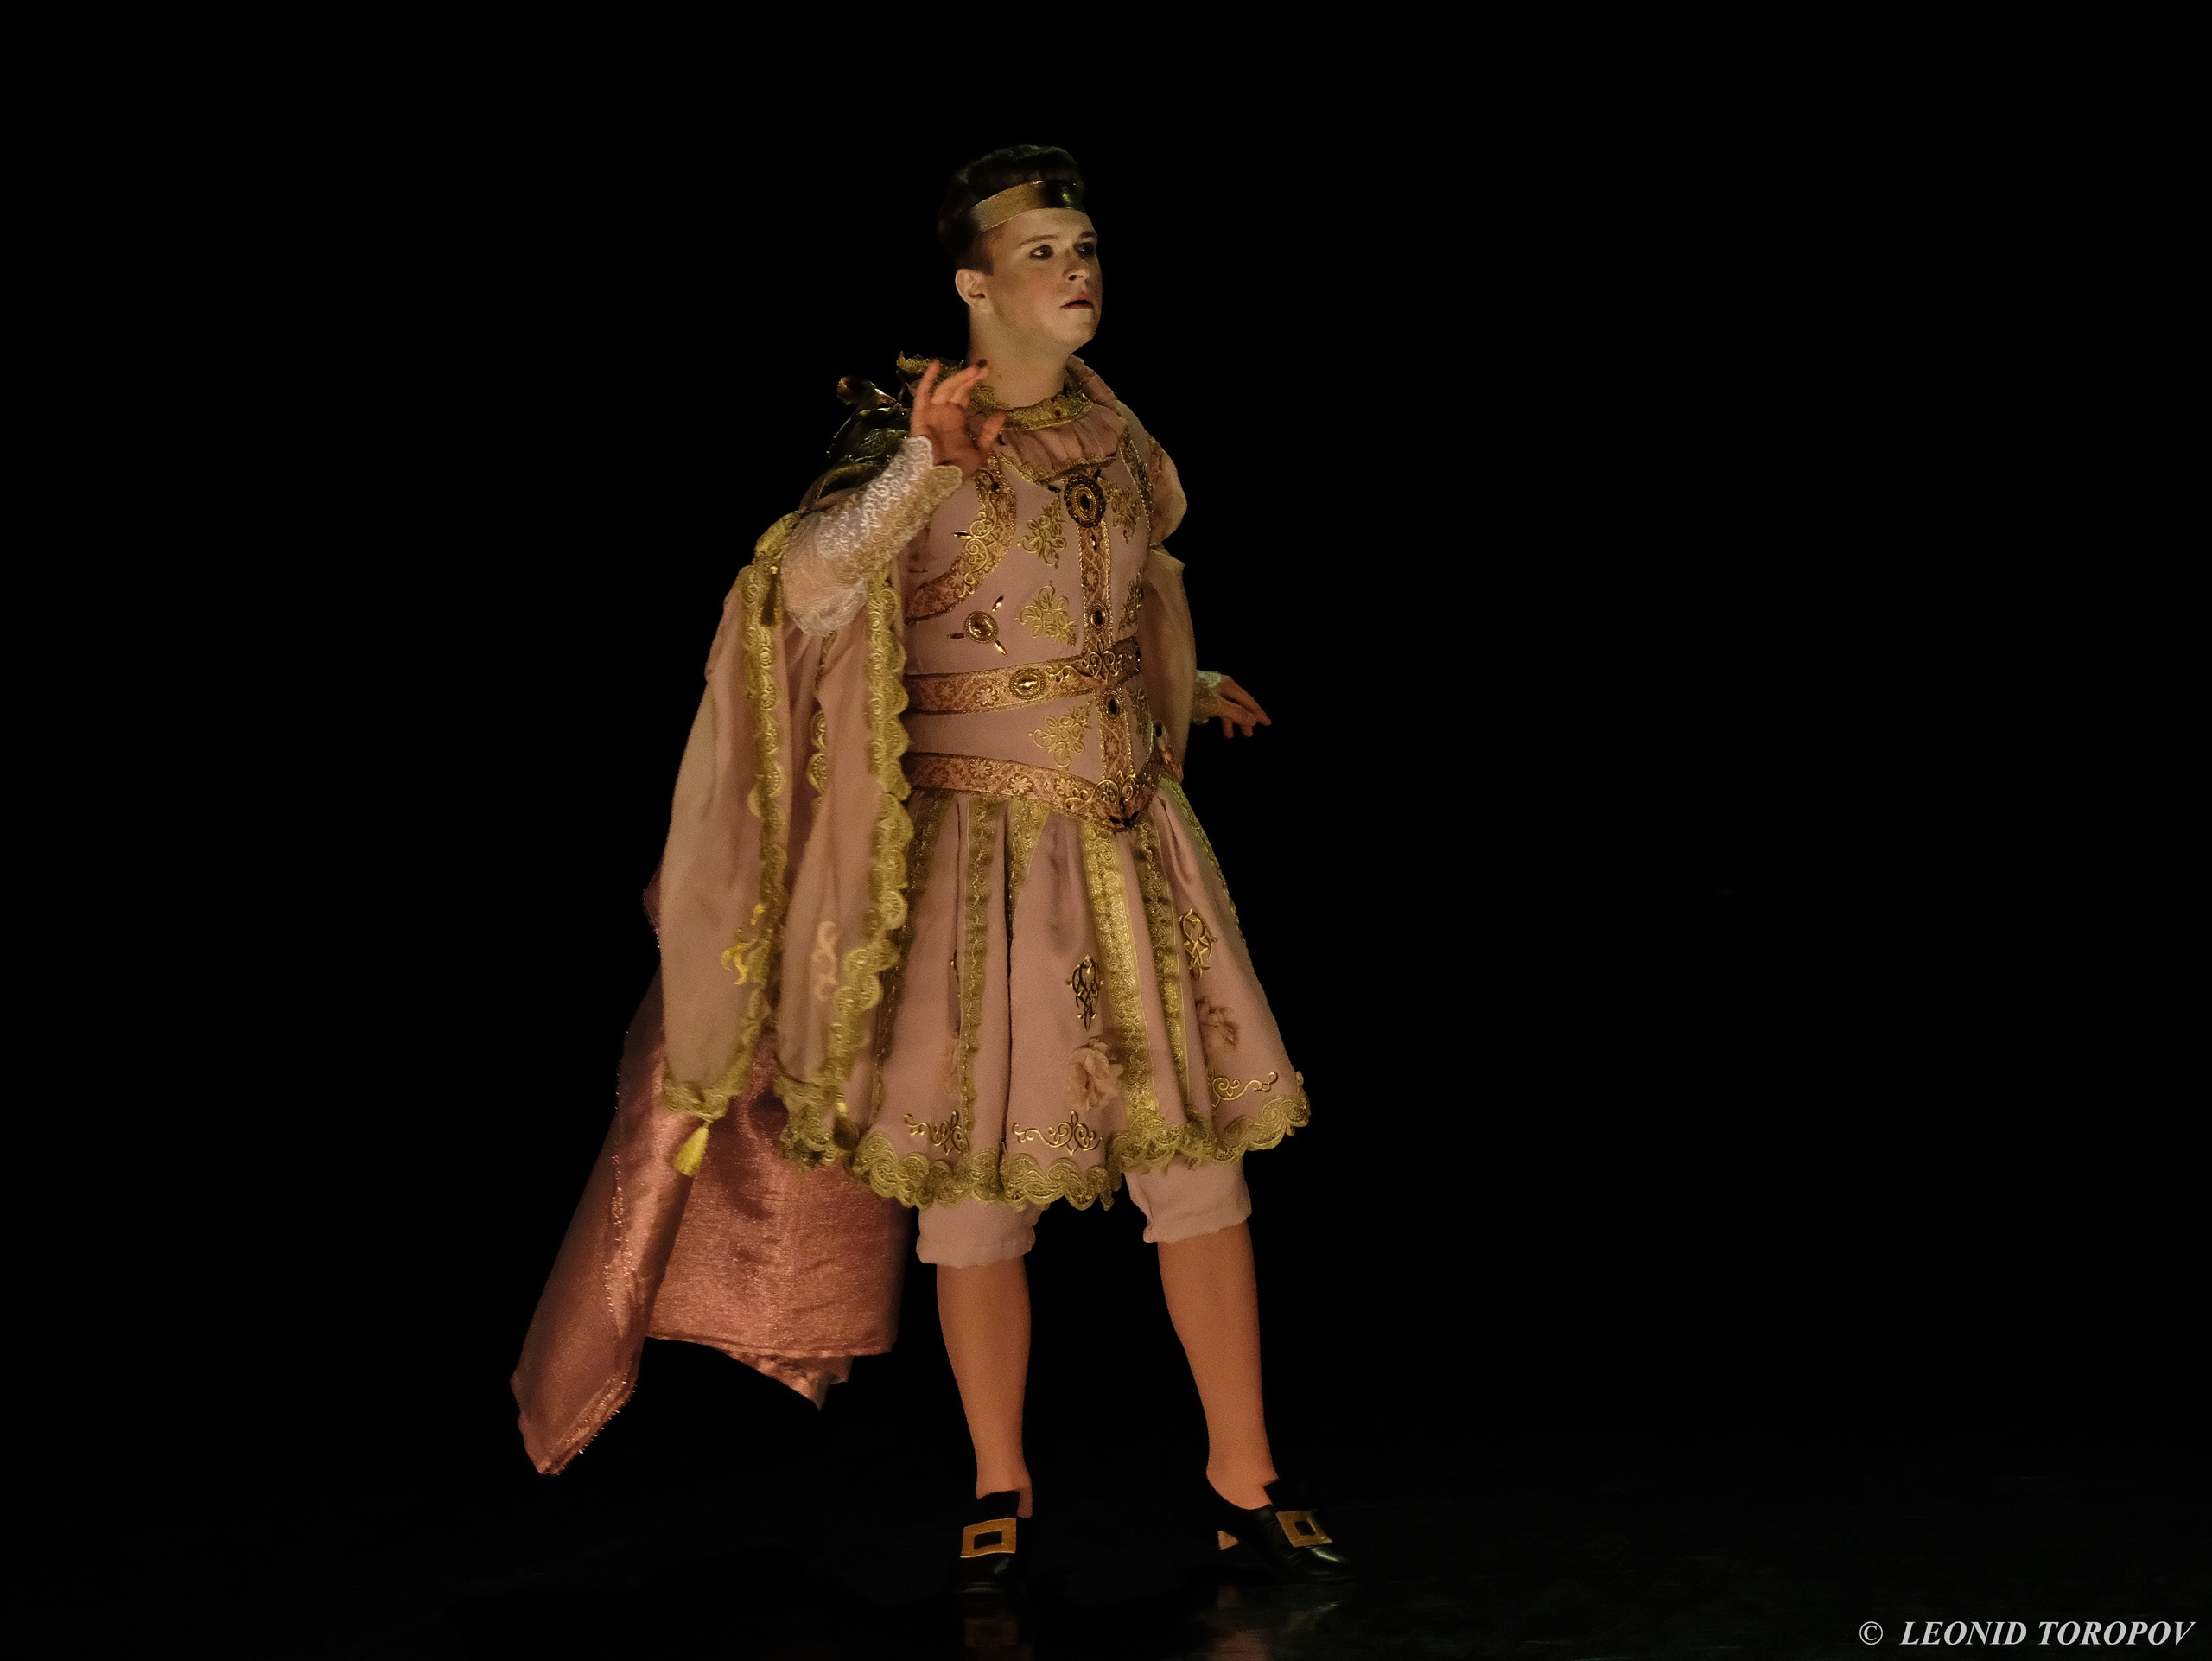 Boris Stepanov in the title role in Jean-Baptiste Lully's Atys